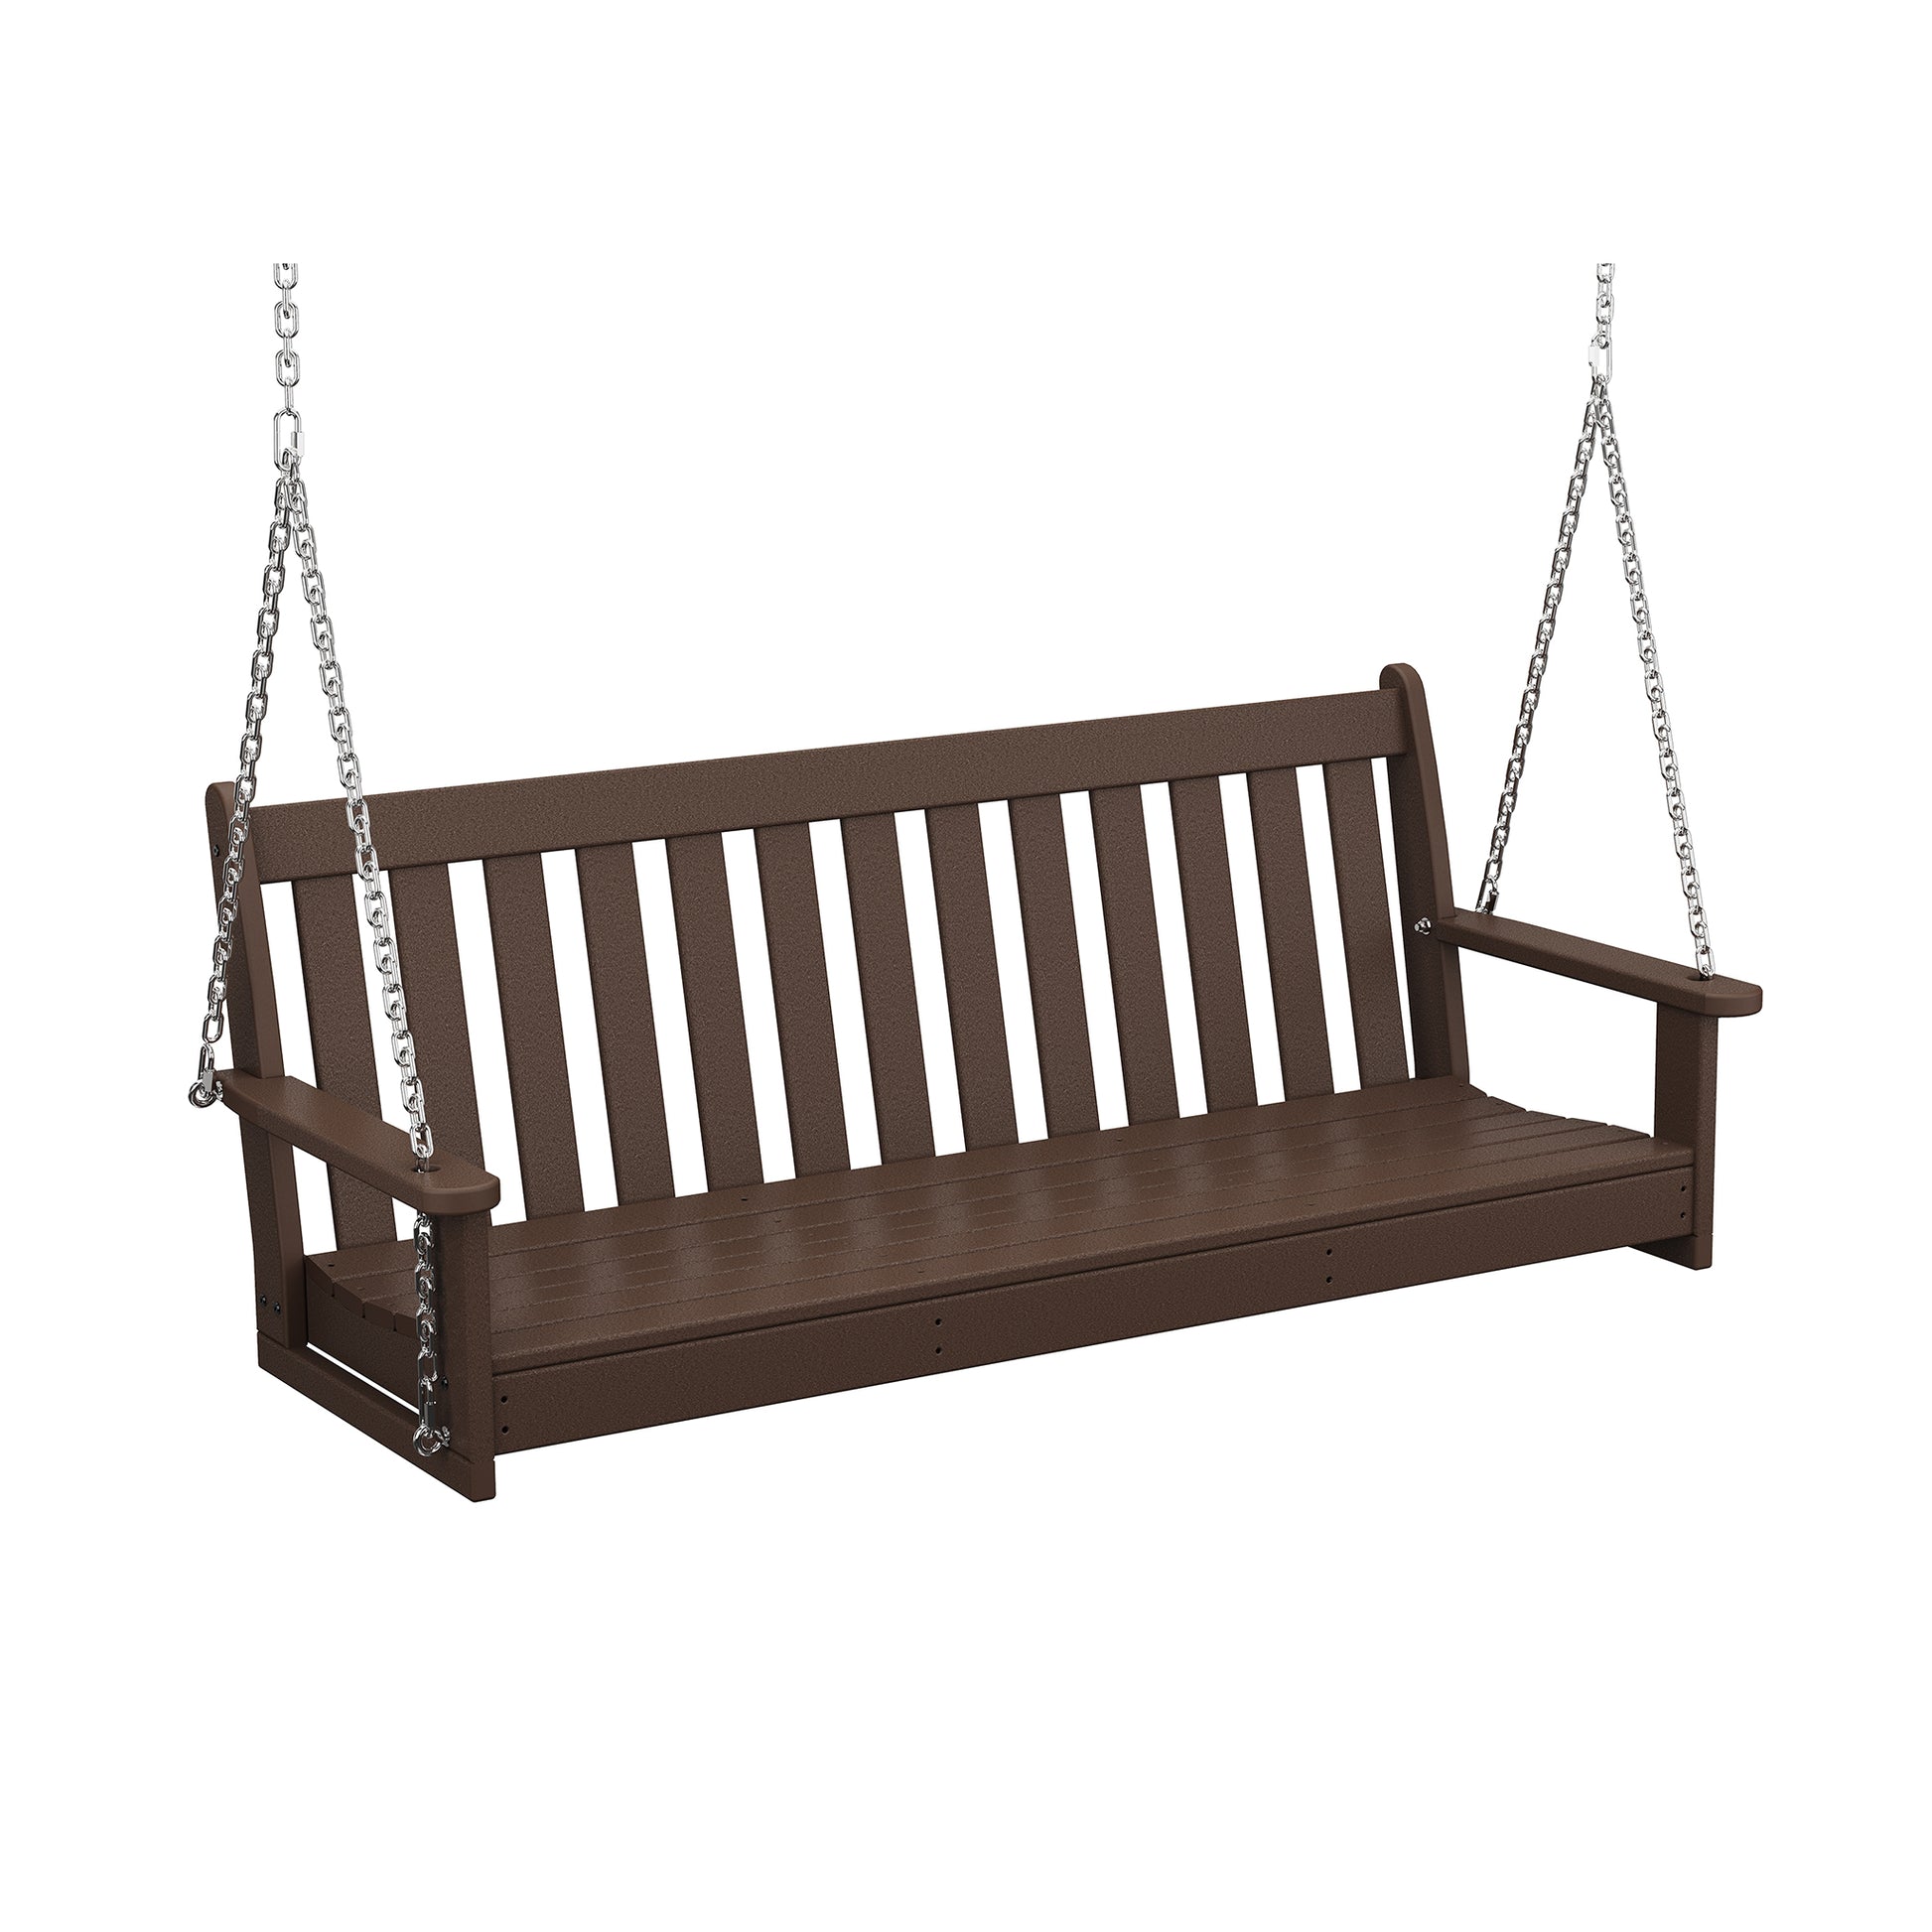 A POLYWOOD® Vineyard 60" porch swing suspended by chains, featuring a horizontal slat back and seat in a rich brown color, against a white background.